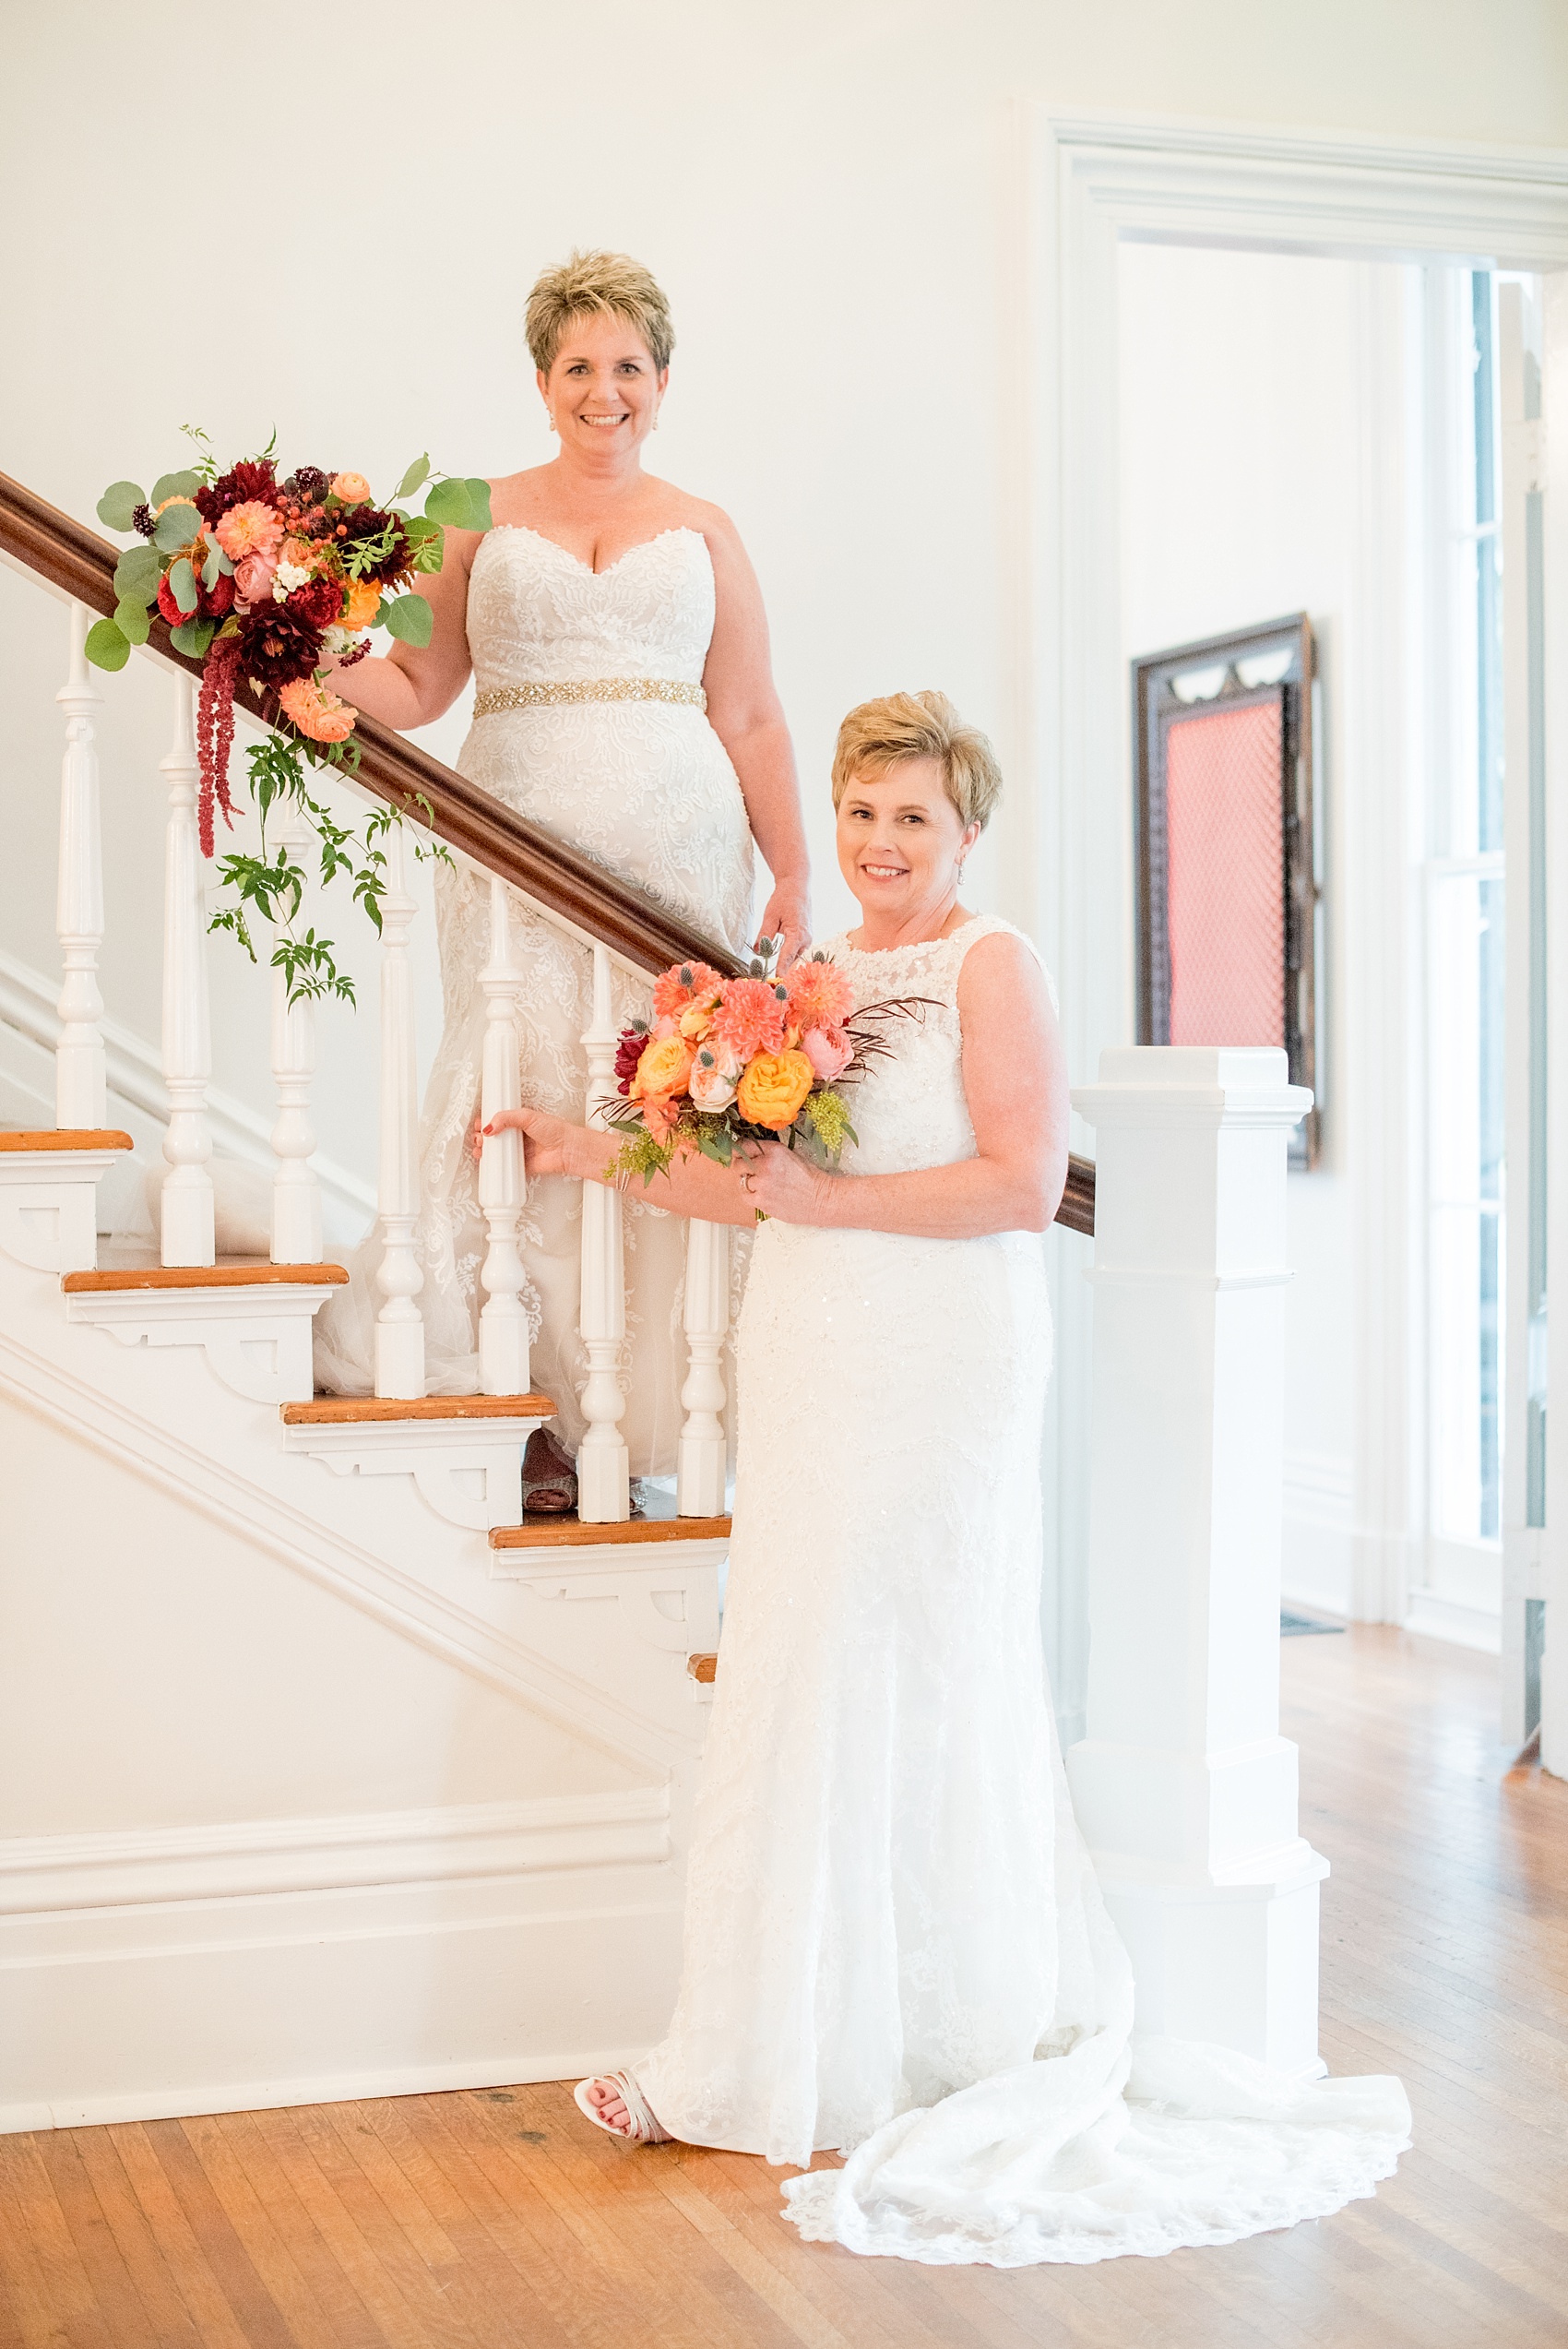 Mikkel Paige Photography photos from a Merrimon-Wynne House wedding in Raleigh. Two brides on a picturesque staircase for a same-sex, lesbian wedding.